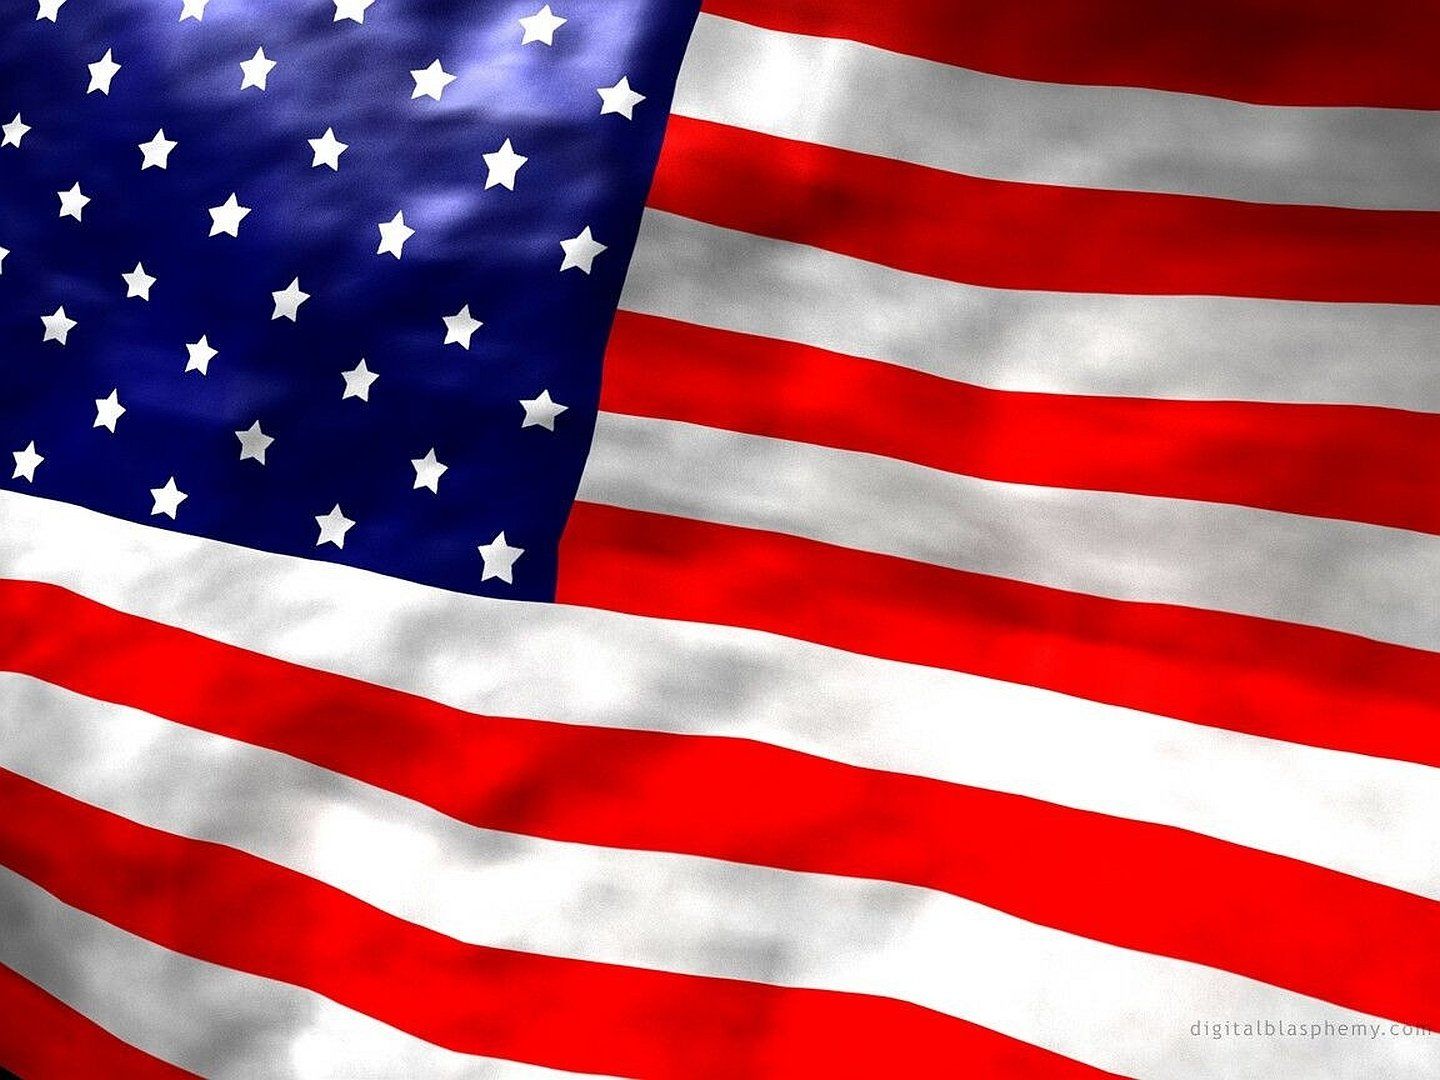 United States Flag Wallpapers